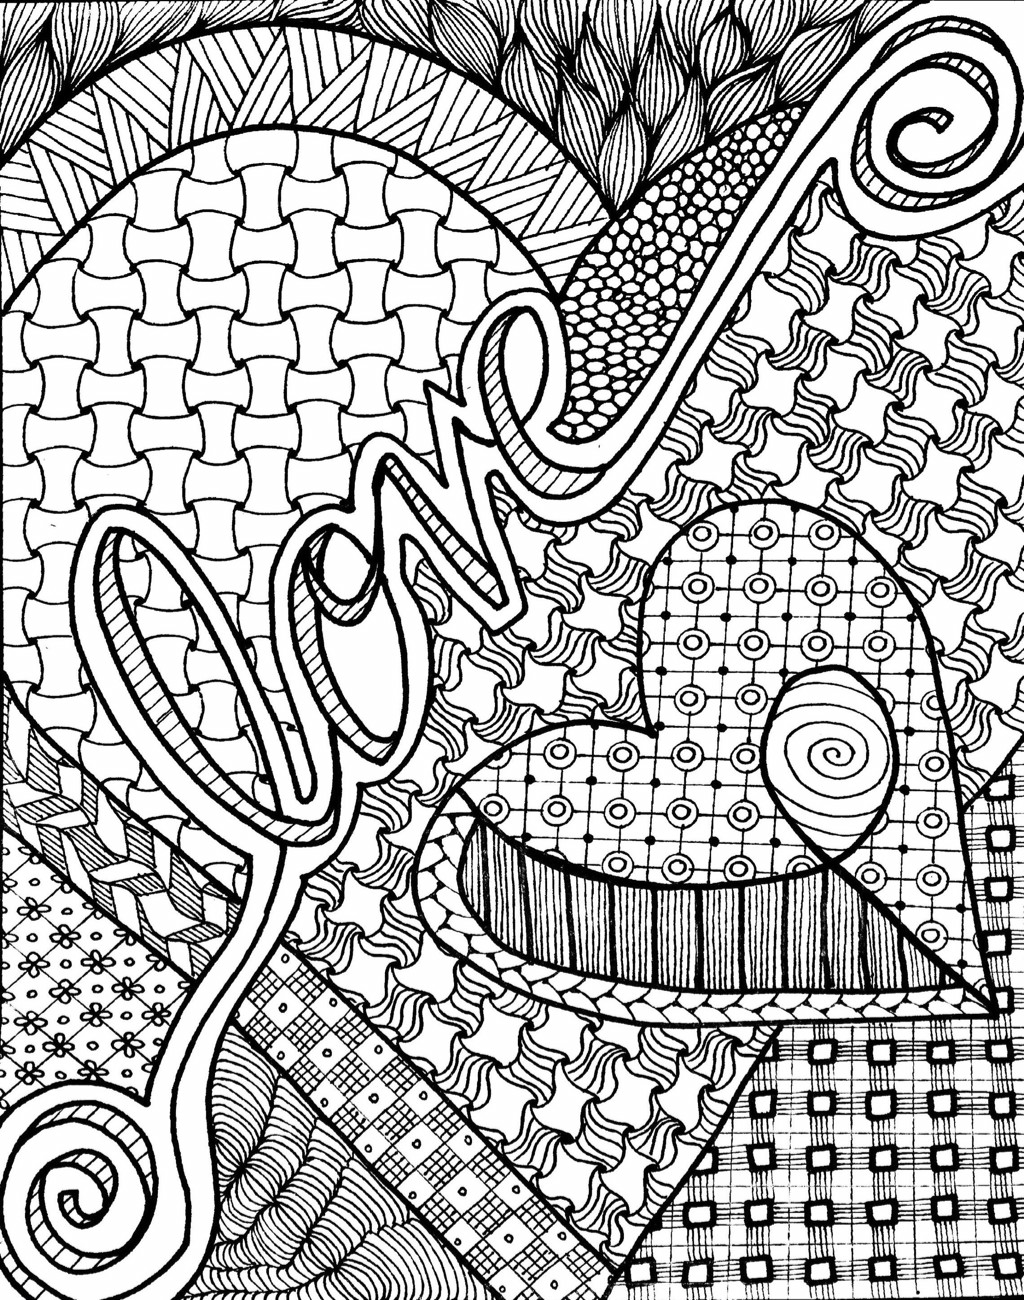 Coloring Pages For Teens With A C
 Free zentangle inspired love coloring page for adults or